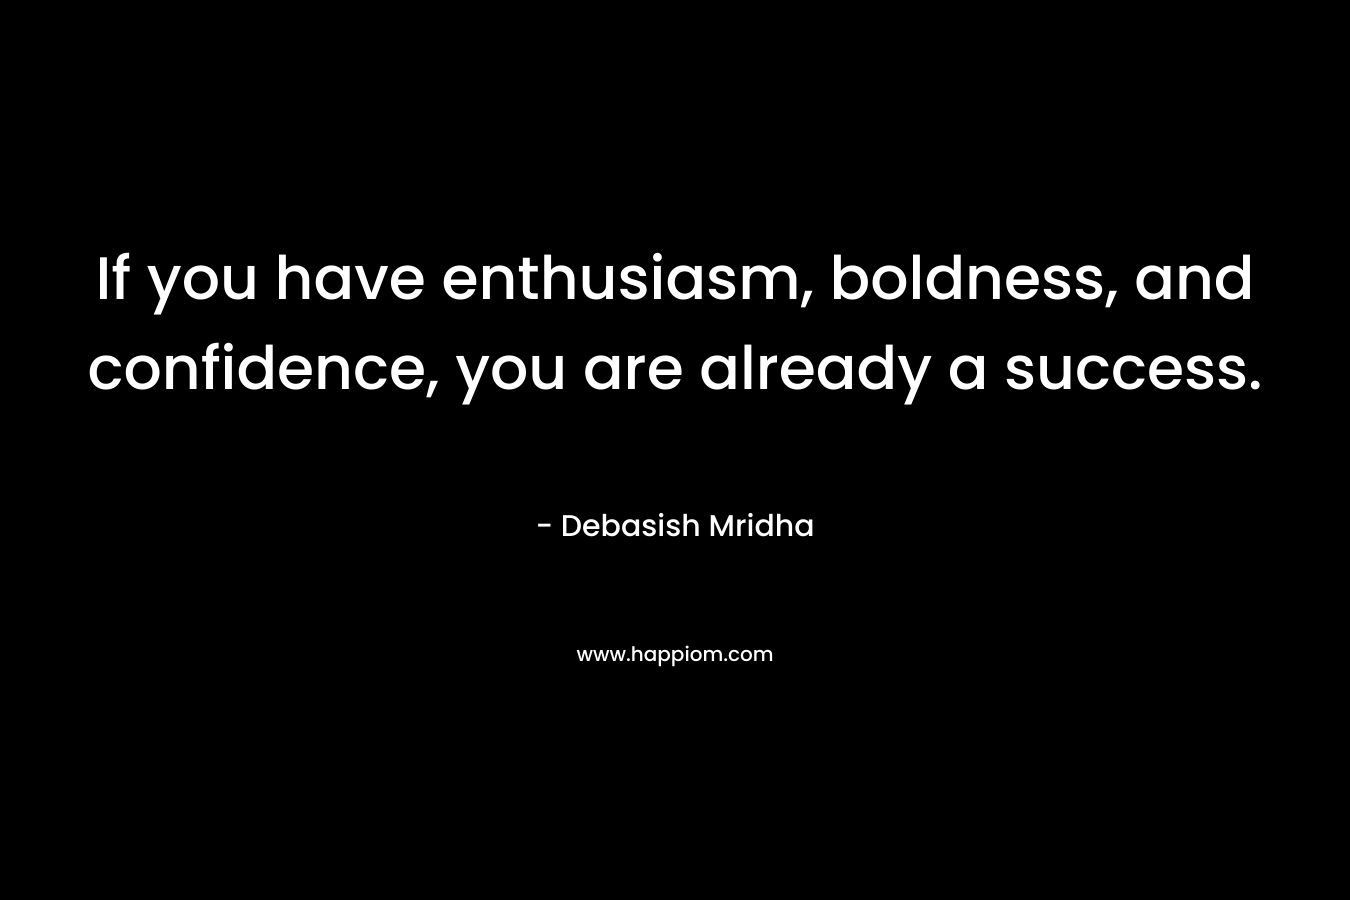 If you have enthusiasm, boldness, and confidence, you are already a success.